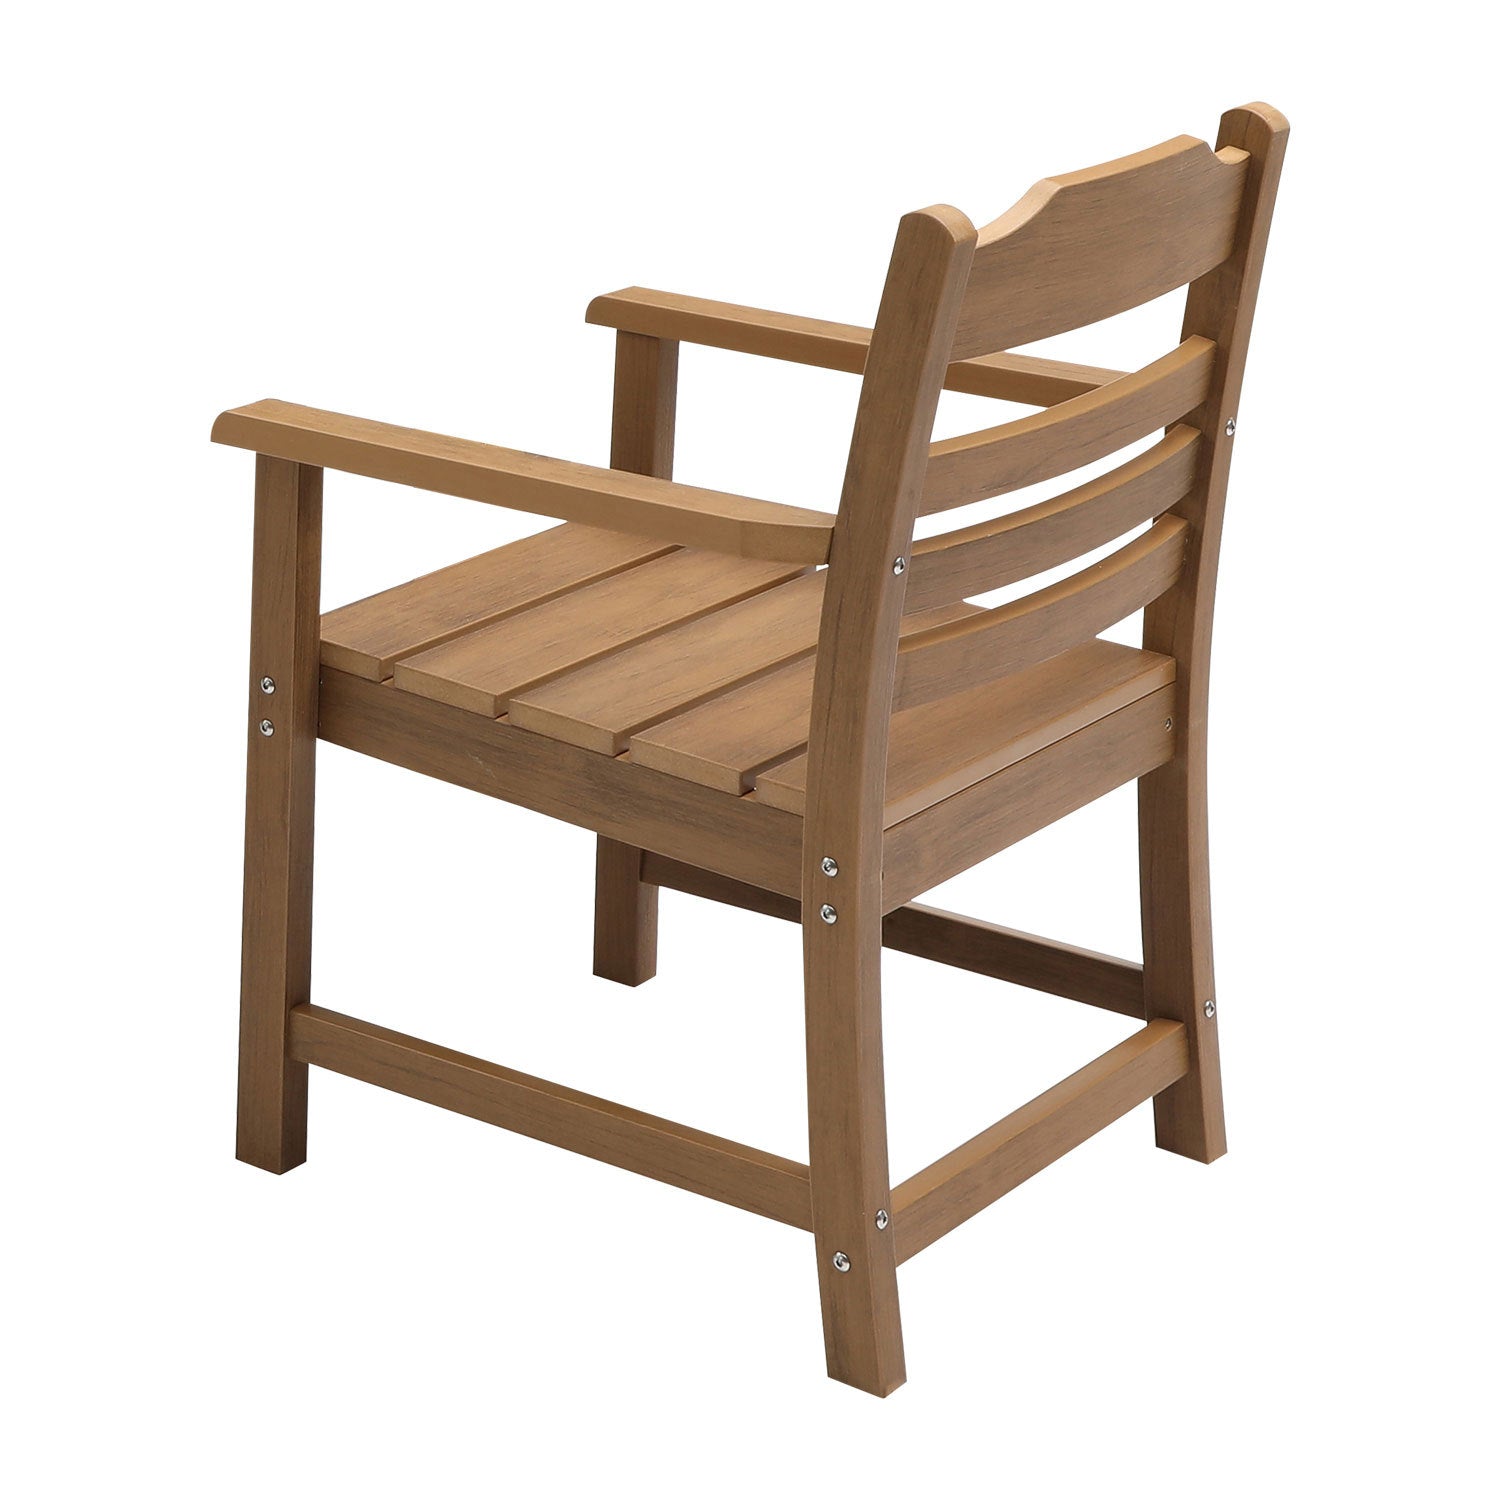 Patio Dining Chair with Armset Set of 2, HIPS light teak-hdpe